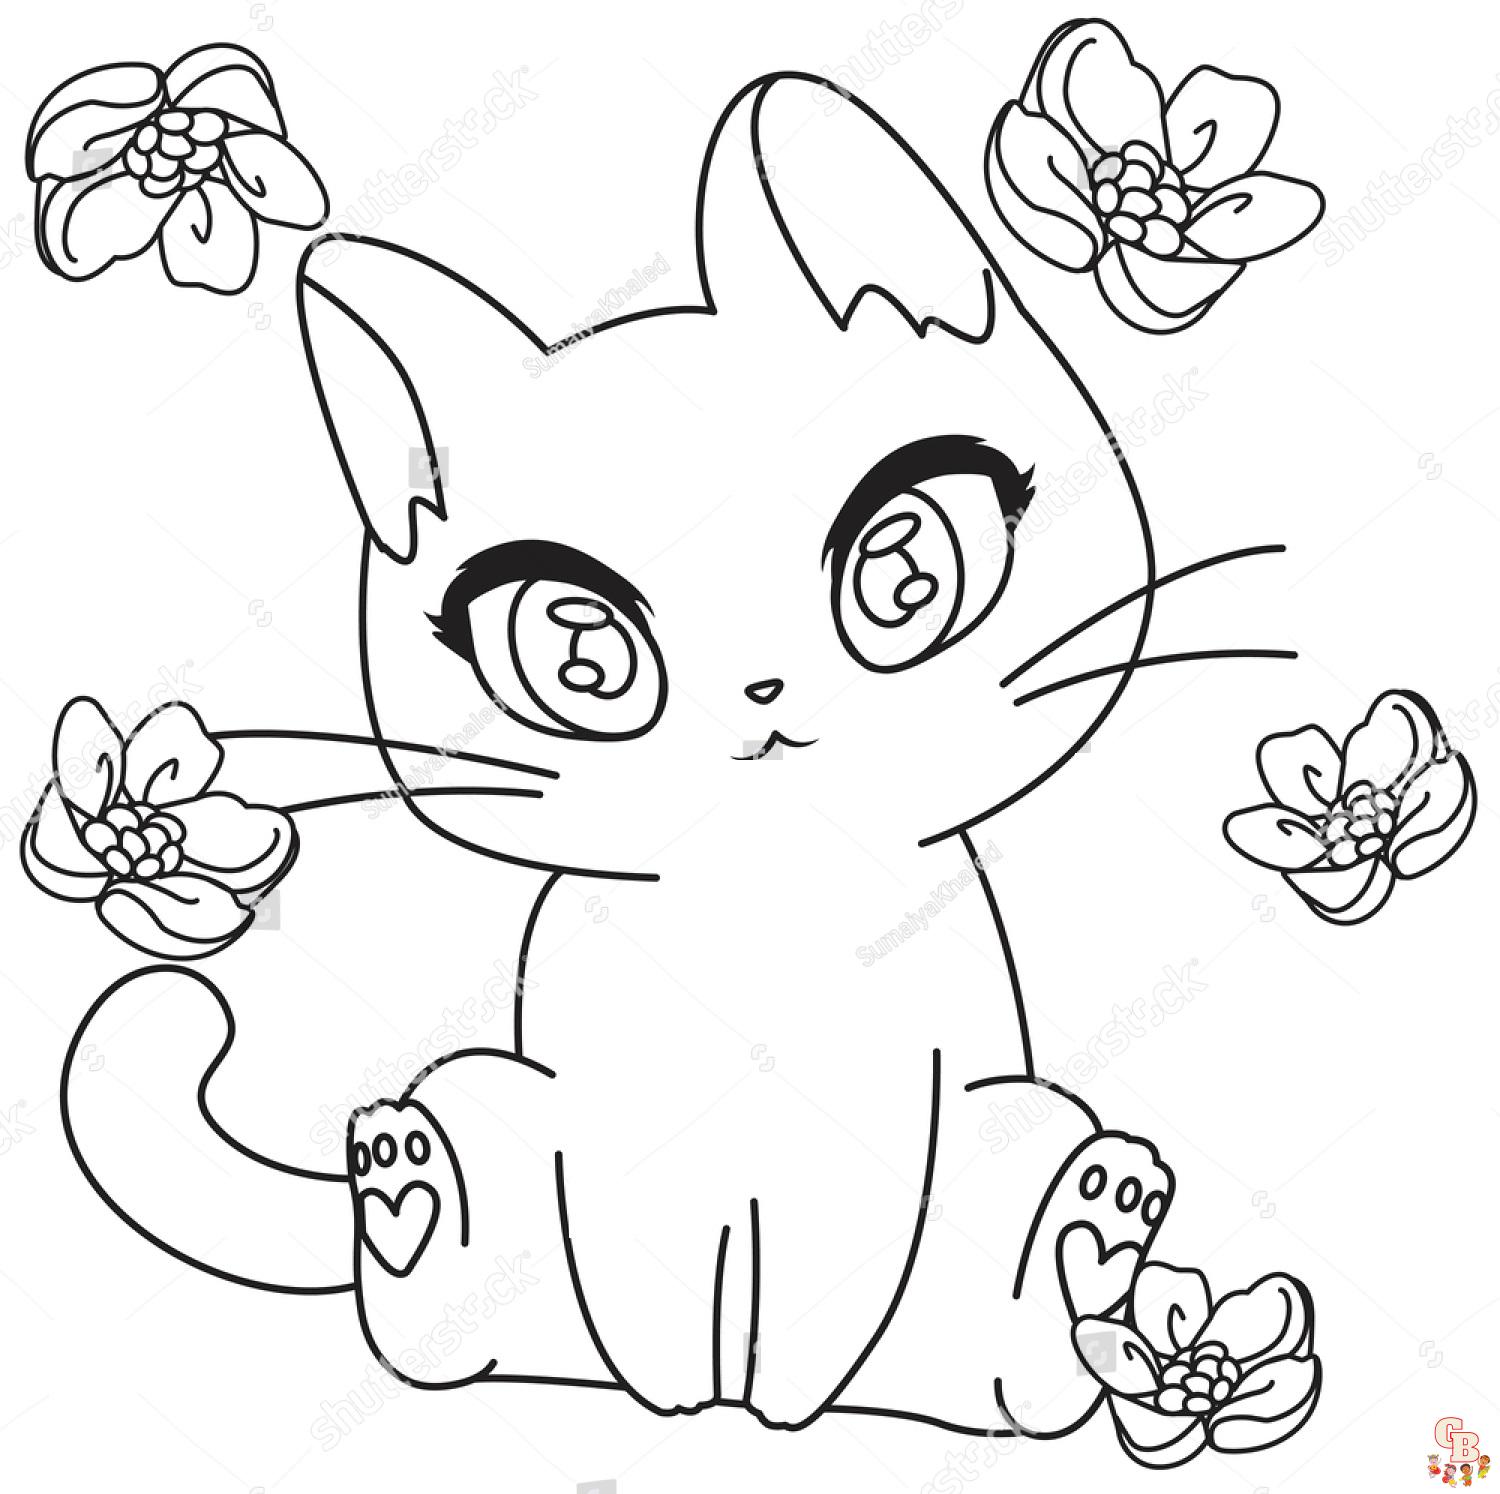 Anime Winged Cat Coloring Pages - Get Coloring Pages